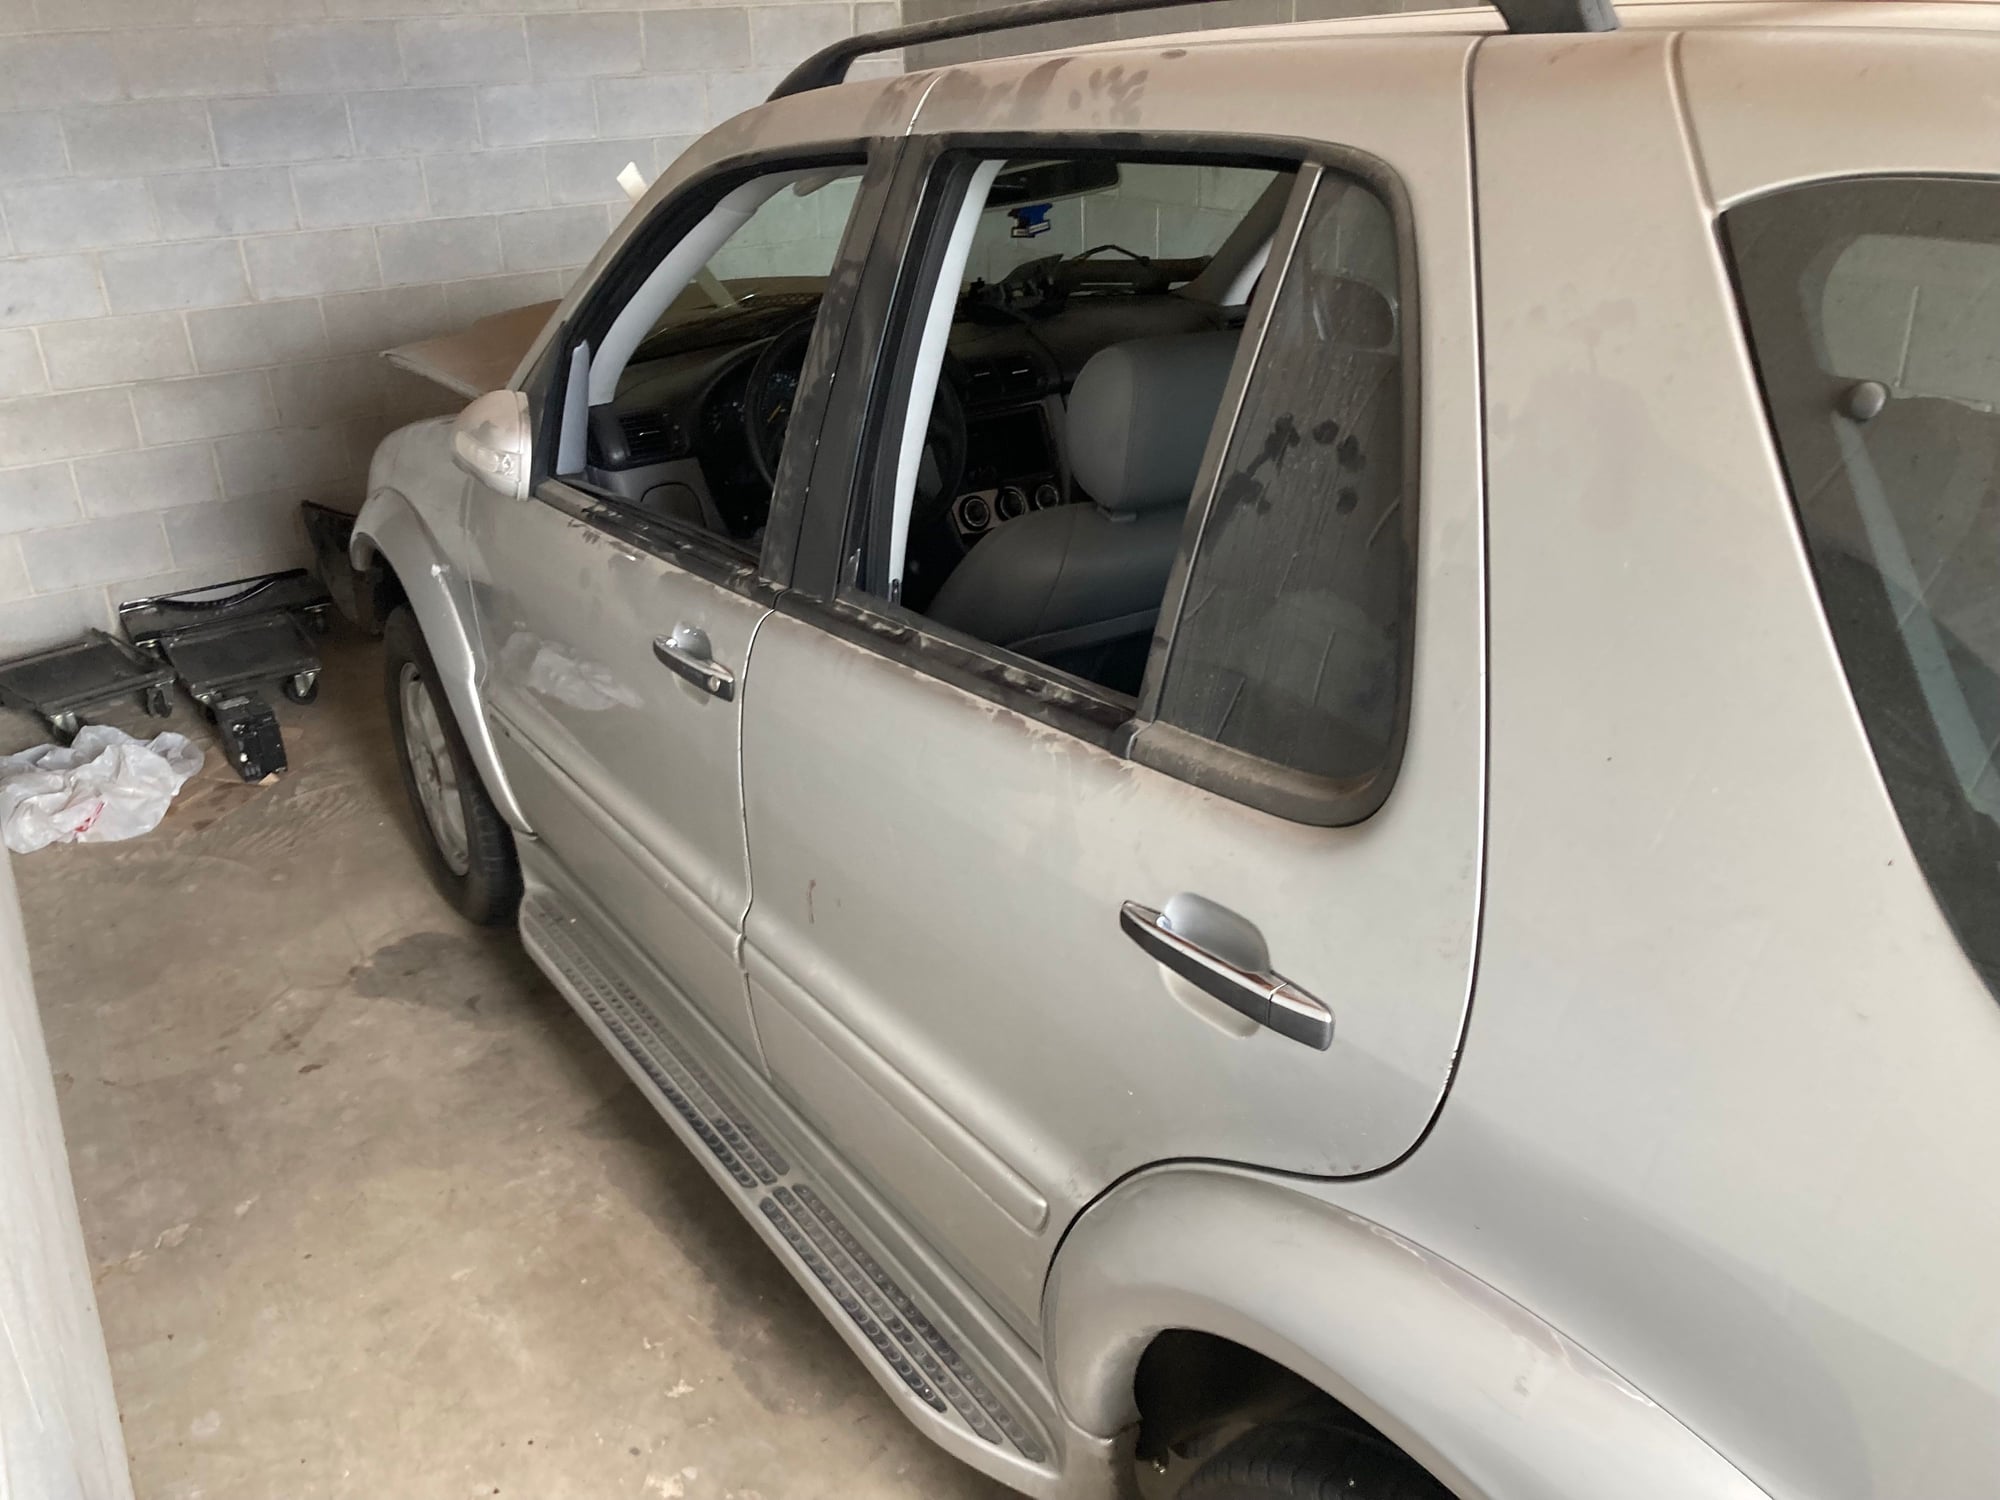 2002 Mercedes-Benz ML500 - Parts Car Ready for the Scrap Pile - Provo, UT 84604, United States